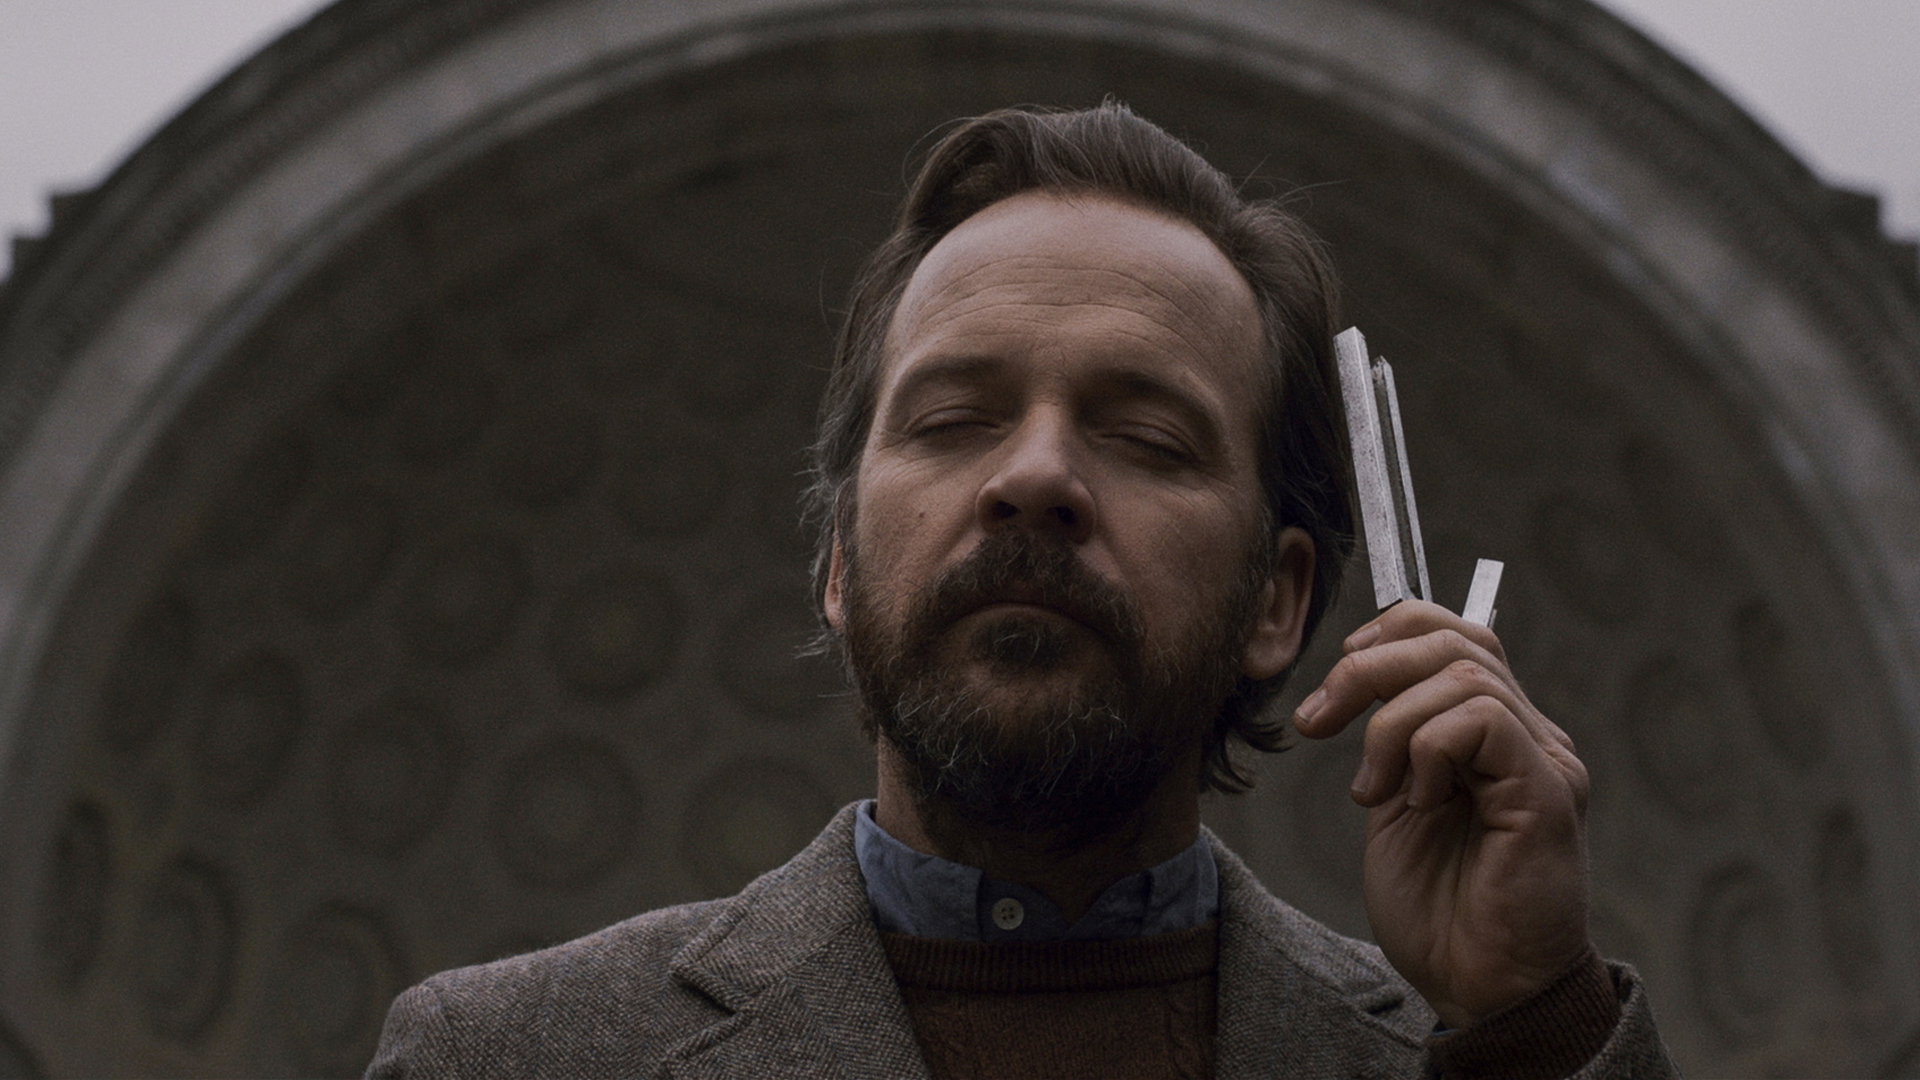 Trailer still frame from The Sound of Silence, man holding tuning fork